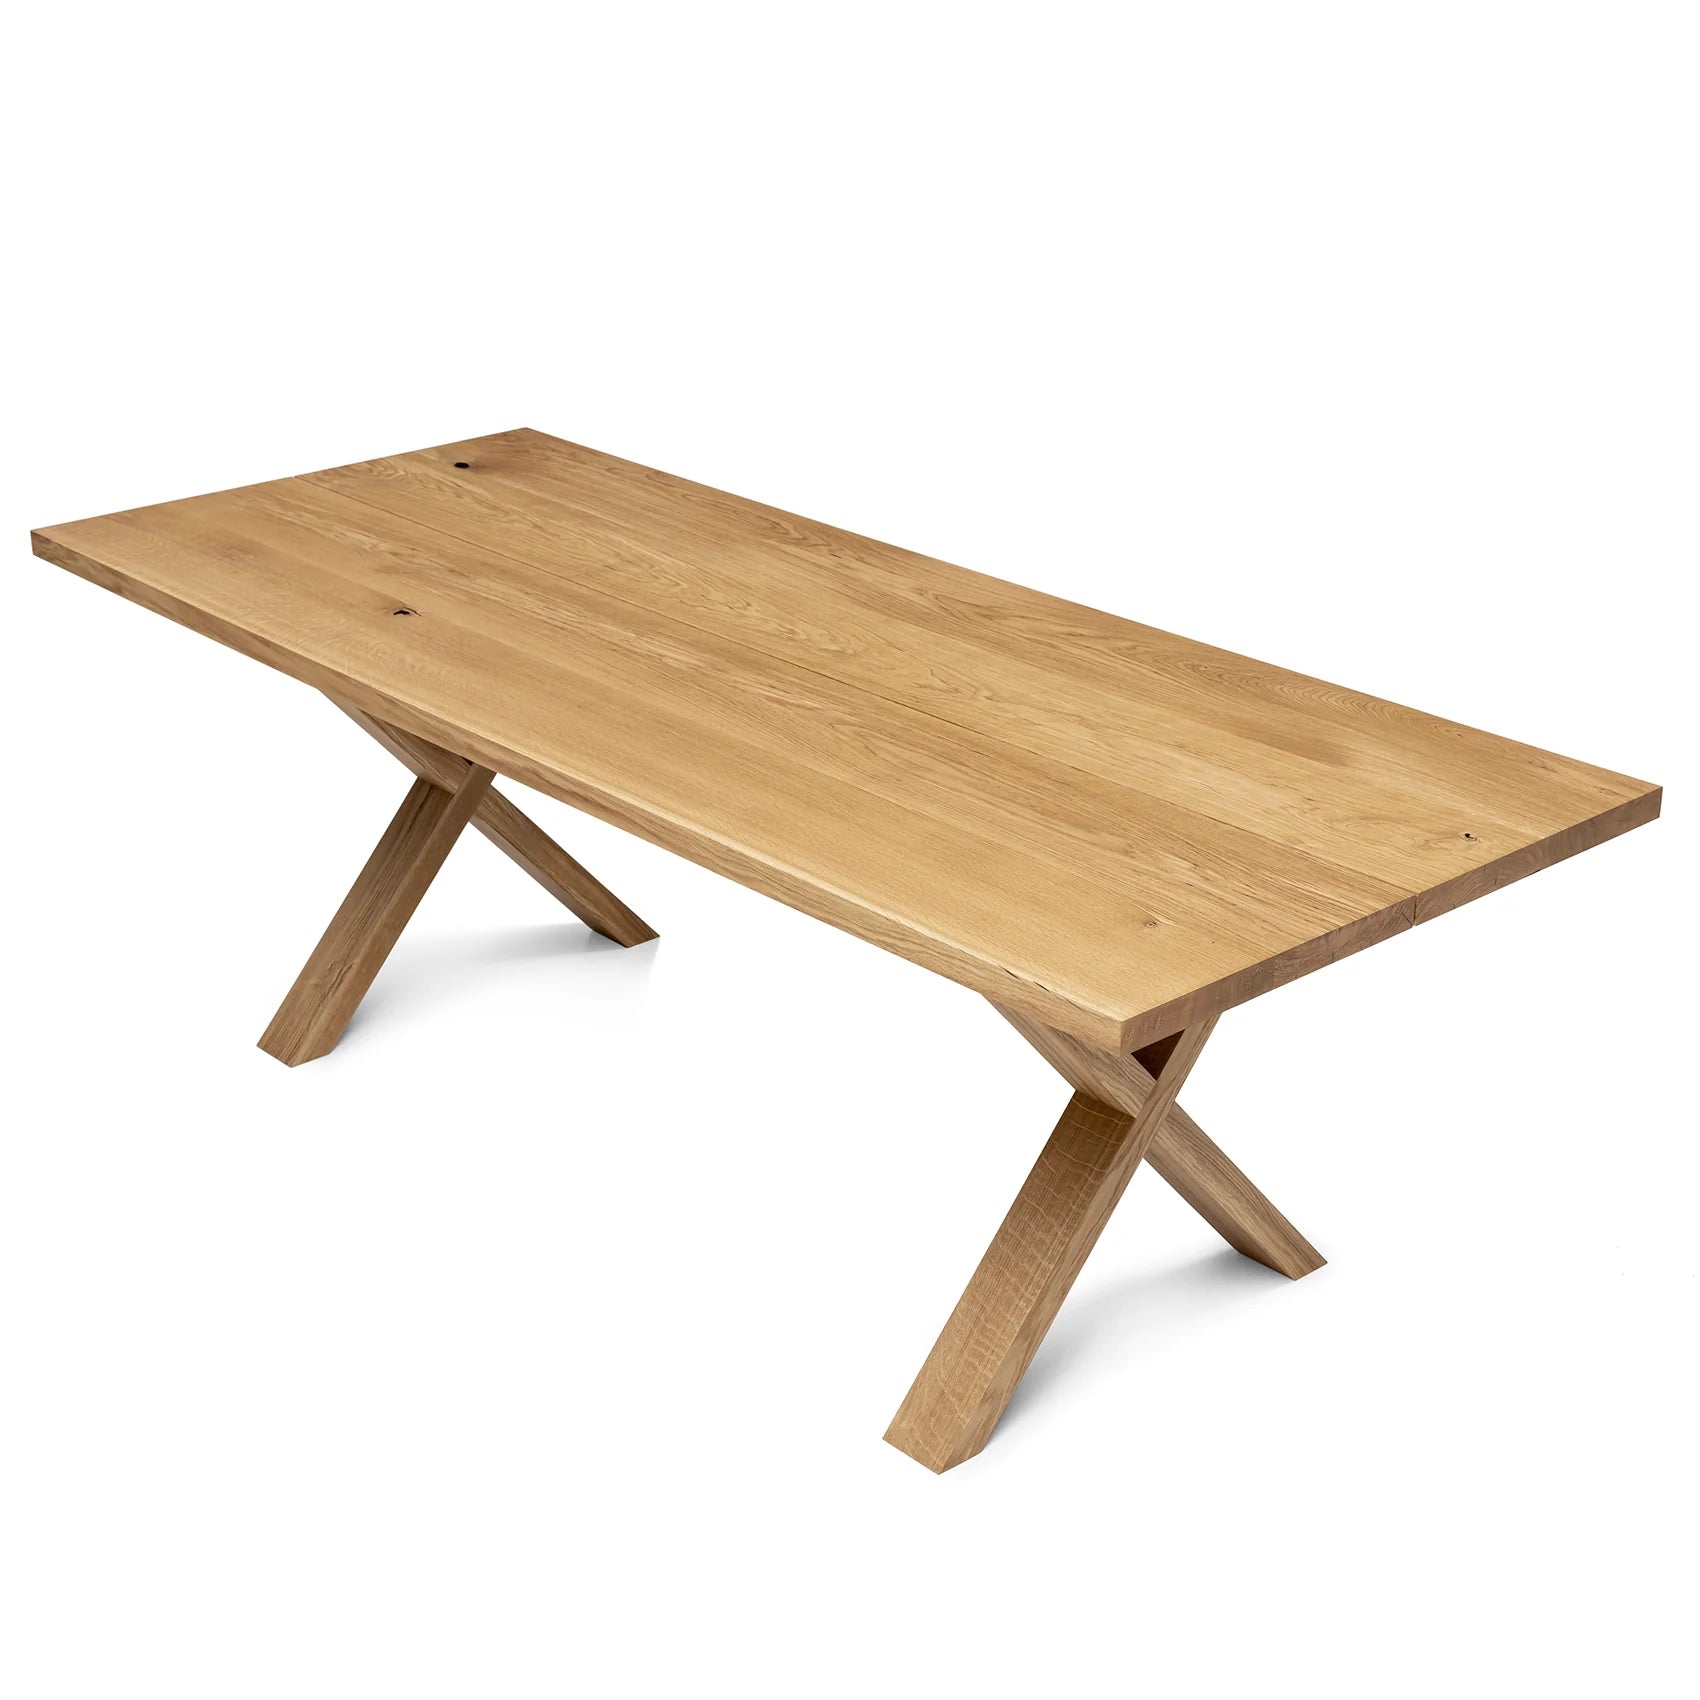 Natural Oak Dining Table Extendable 